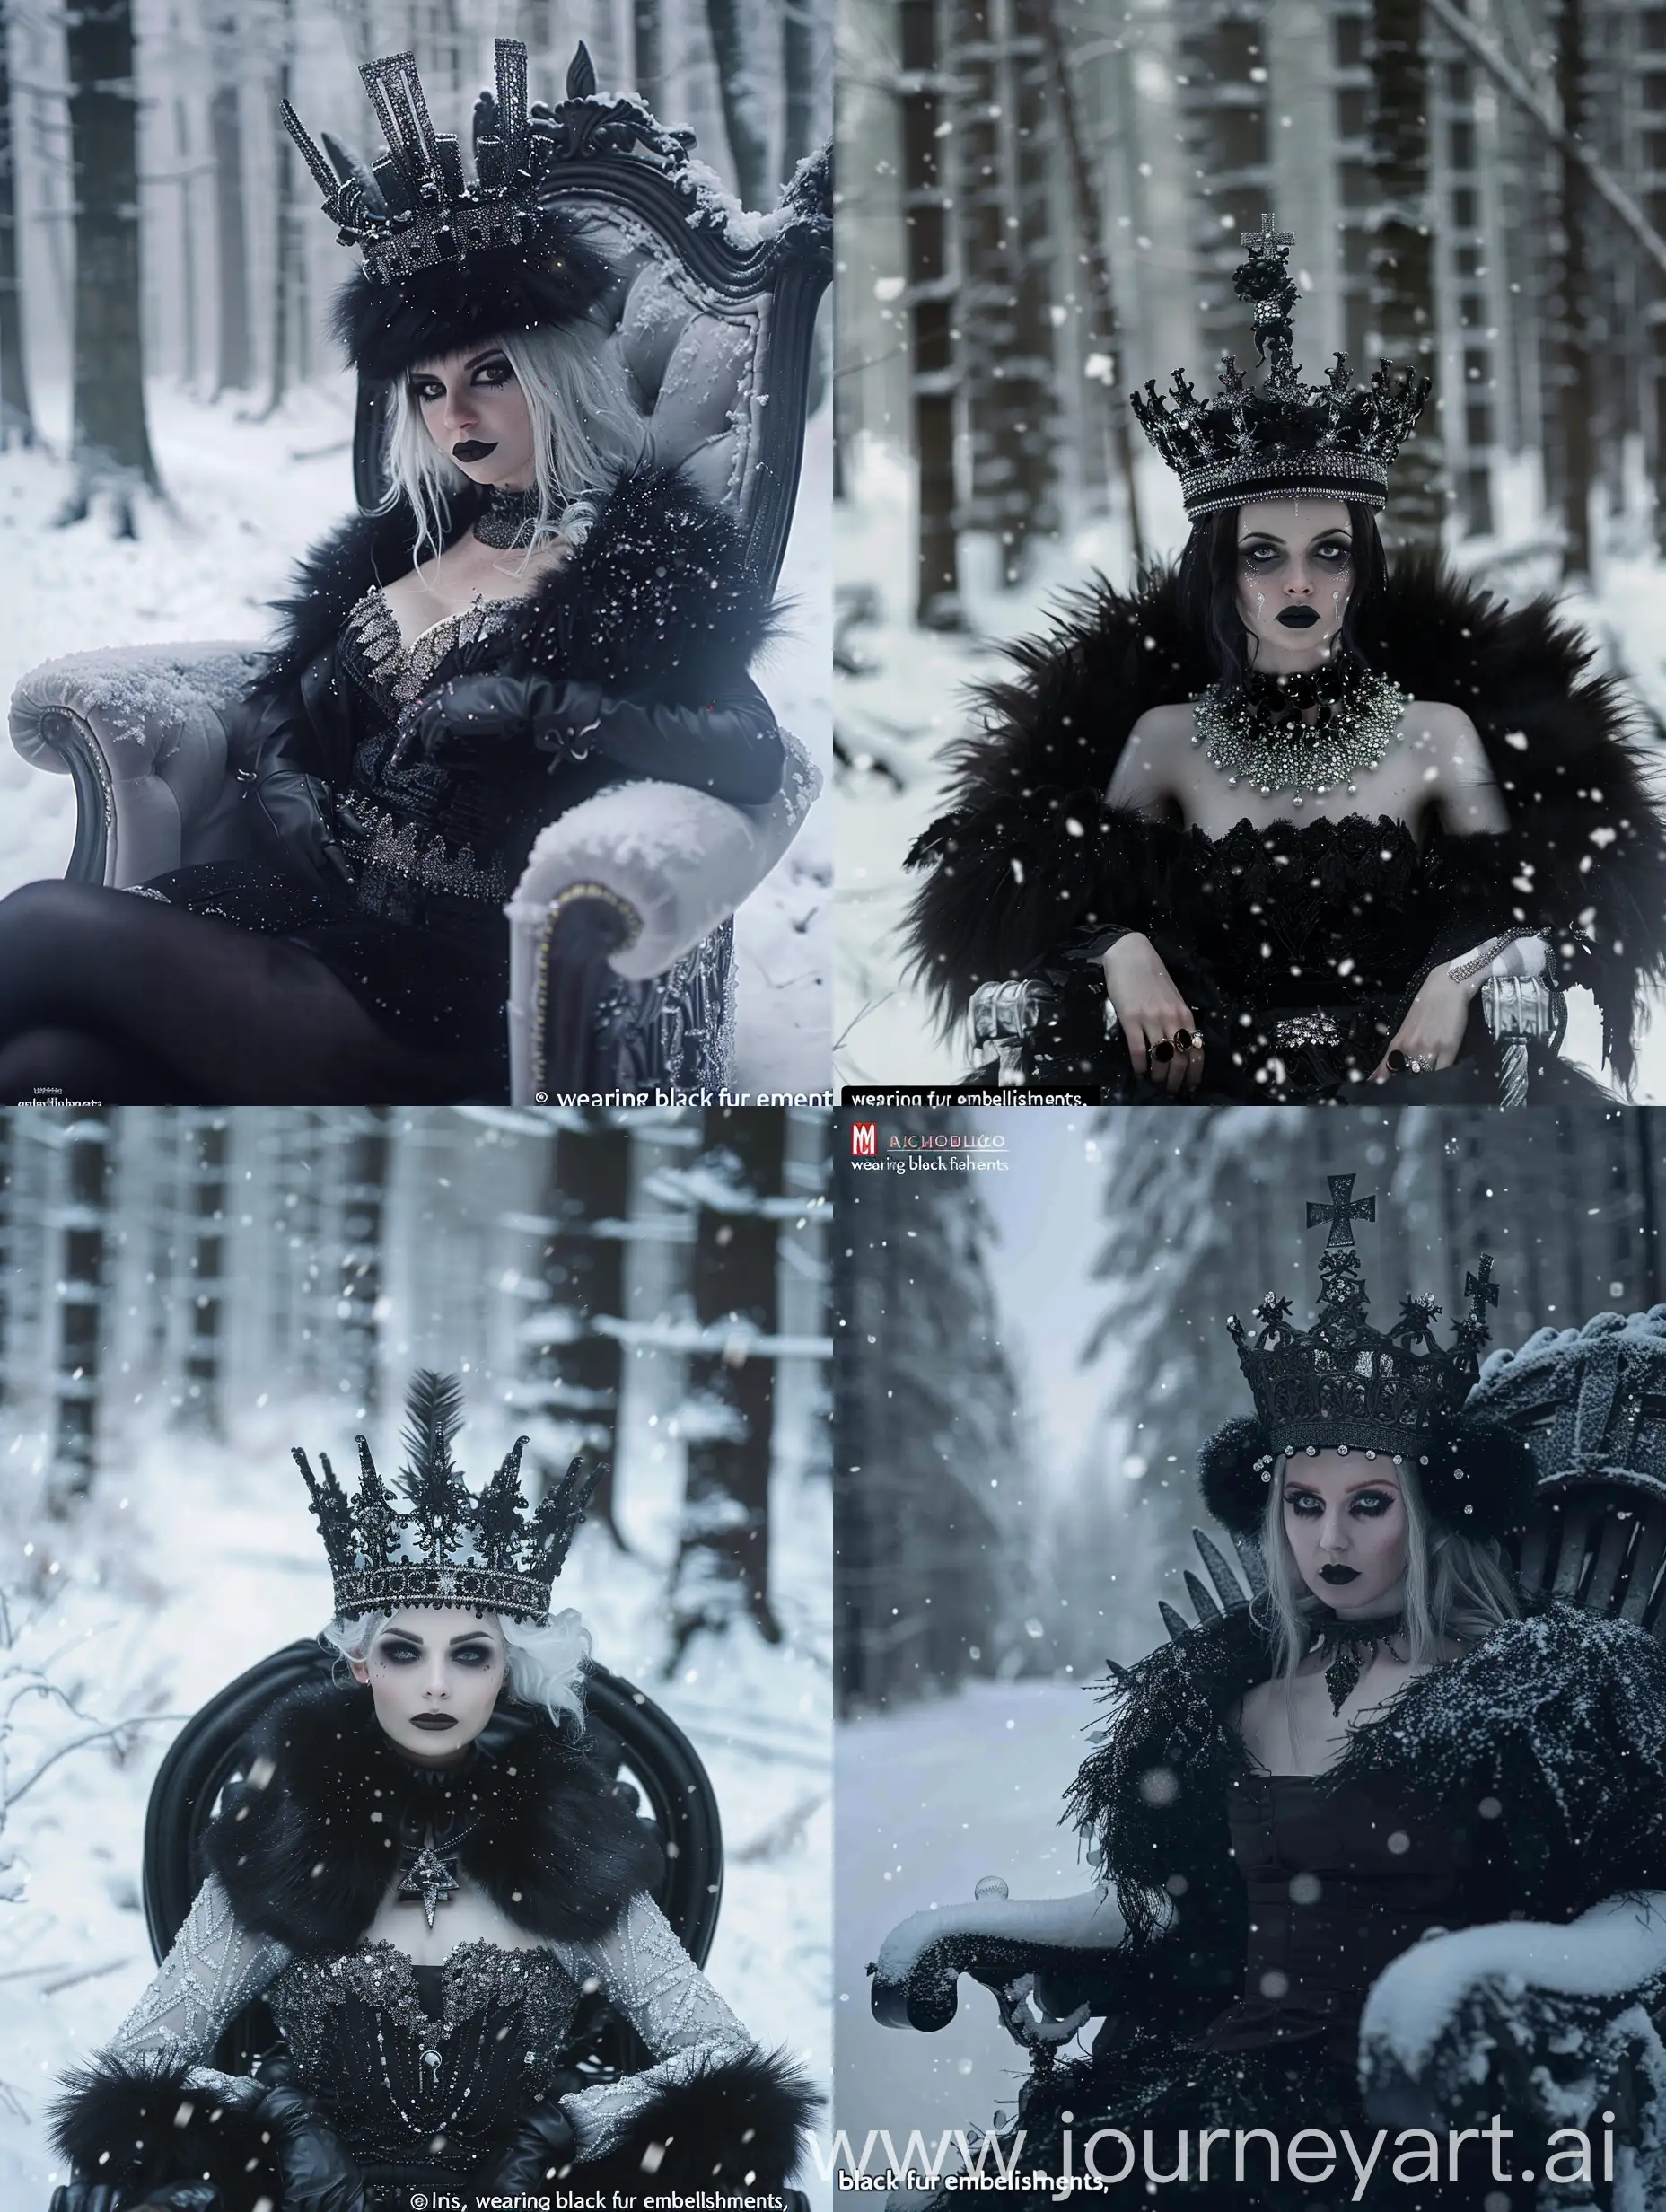 a beautiful evil woman in a crown on a throne, snow covered minimalistic forest, dark around eyes, porcelain skin, heavy winter aesthetics, white witch, eerie ”, wearing black fur embellishments, “diamonds, waist - shot, arctic, dark outside, grey, official, run, tom bagshaw style, attention to details, last photo, horror core, dark horror, saturated, occult core